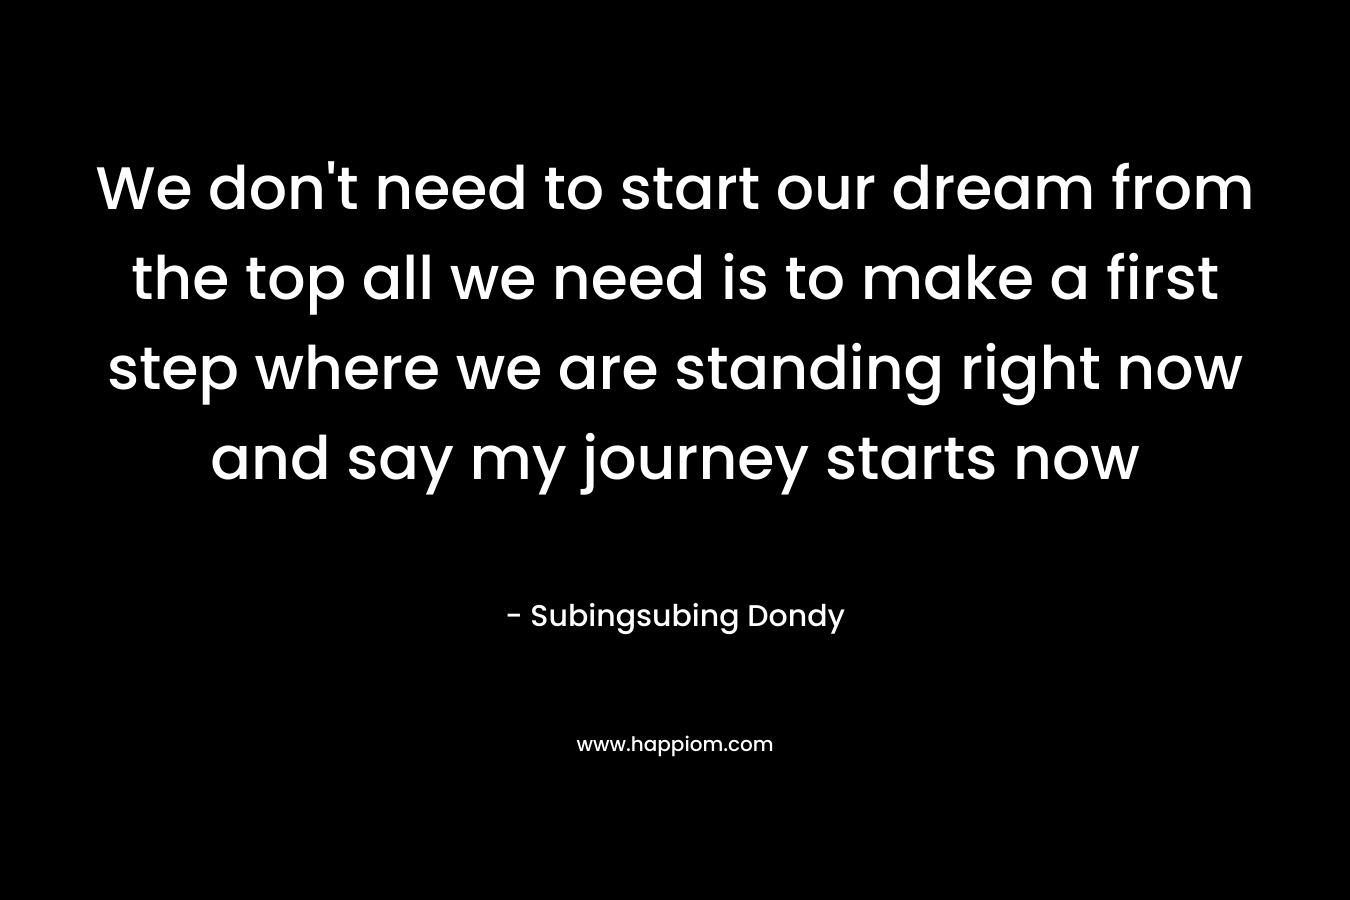 We don’t need to start our dream from the top all we need is to make a first step where we are standing right now and say my journey starts now – Subingsubing Dondy